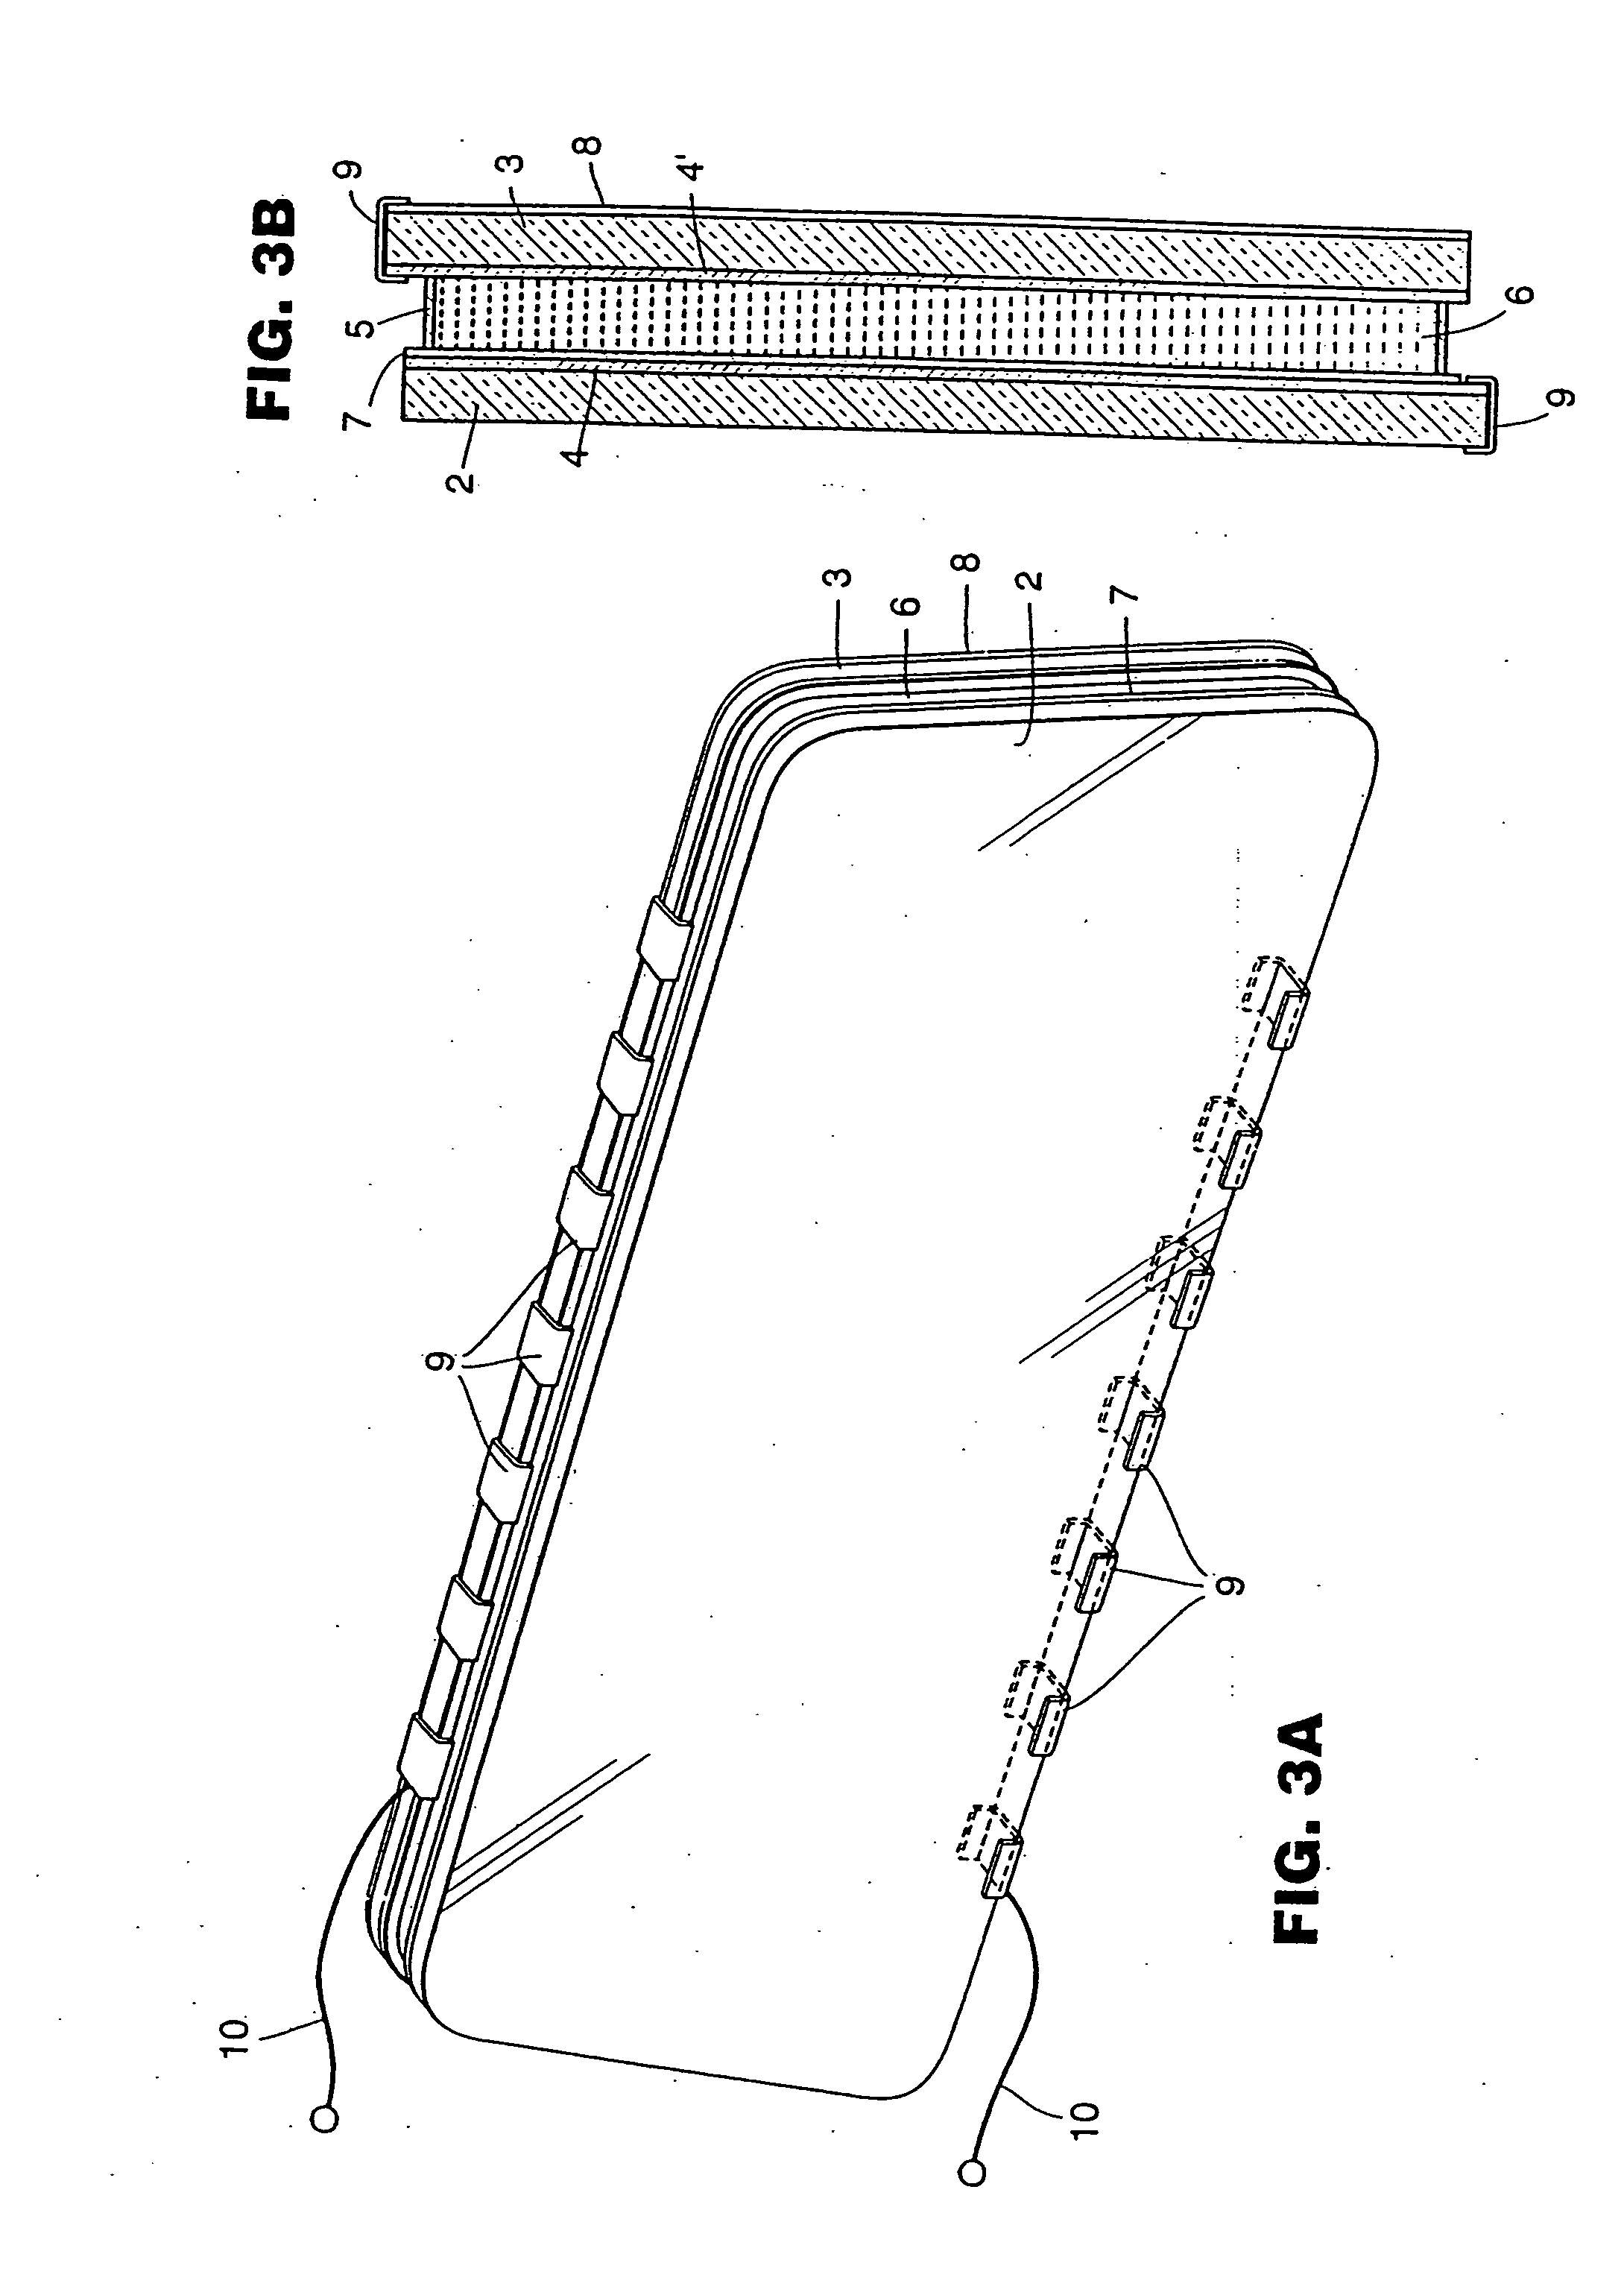 Signal mirror system for a vehicle